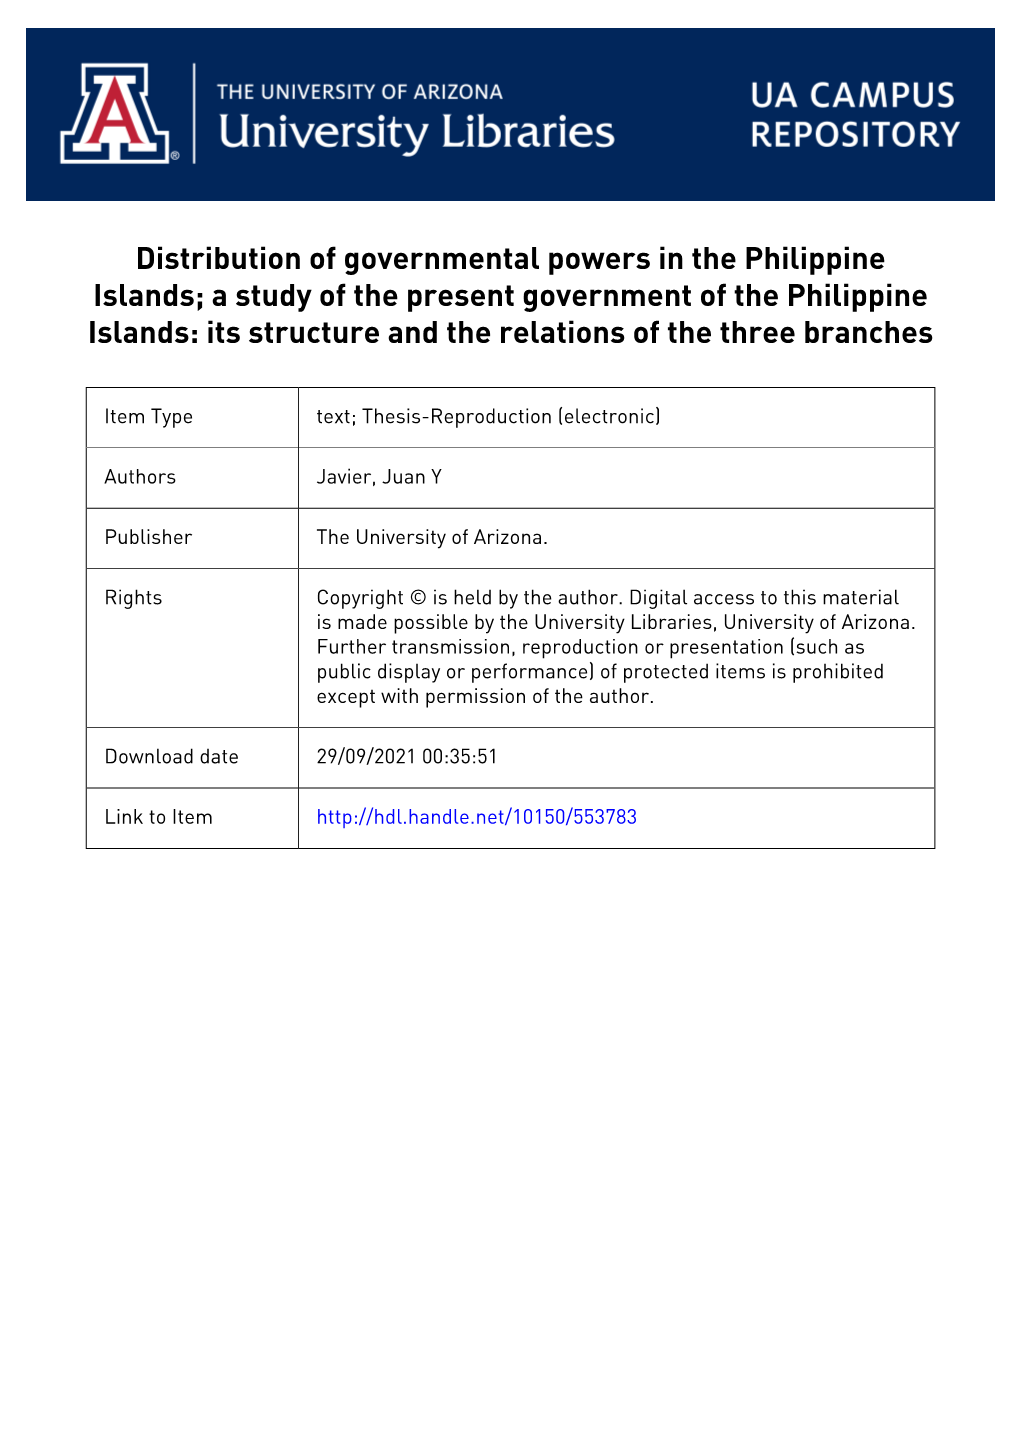 Distribution of Governmental Powers in the Philippine